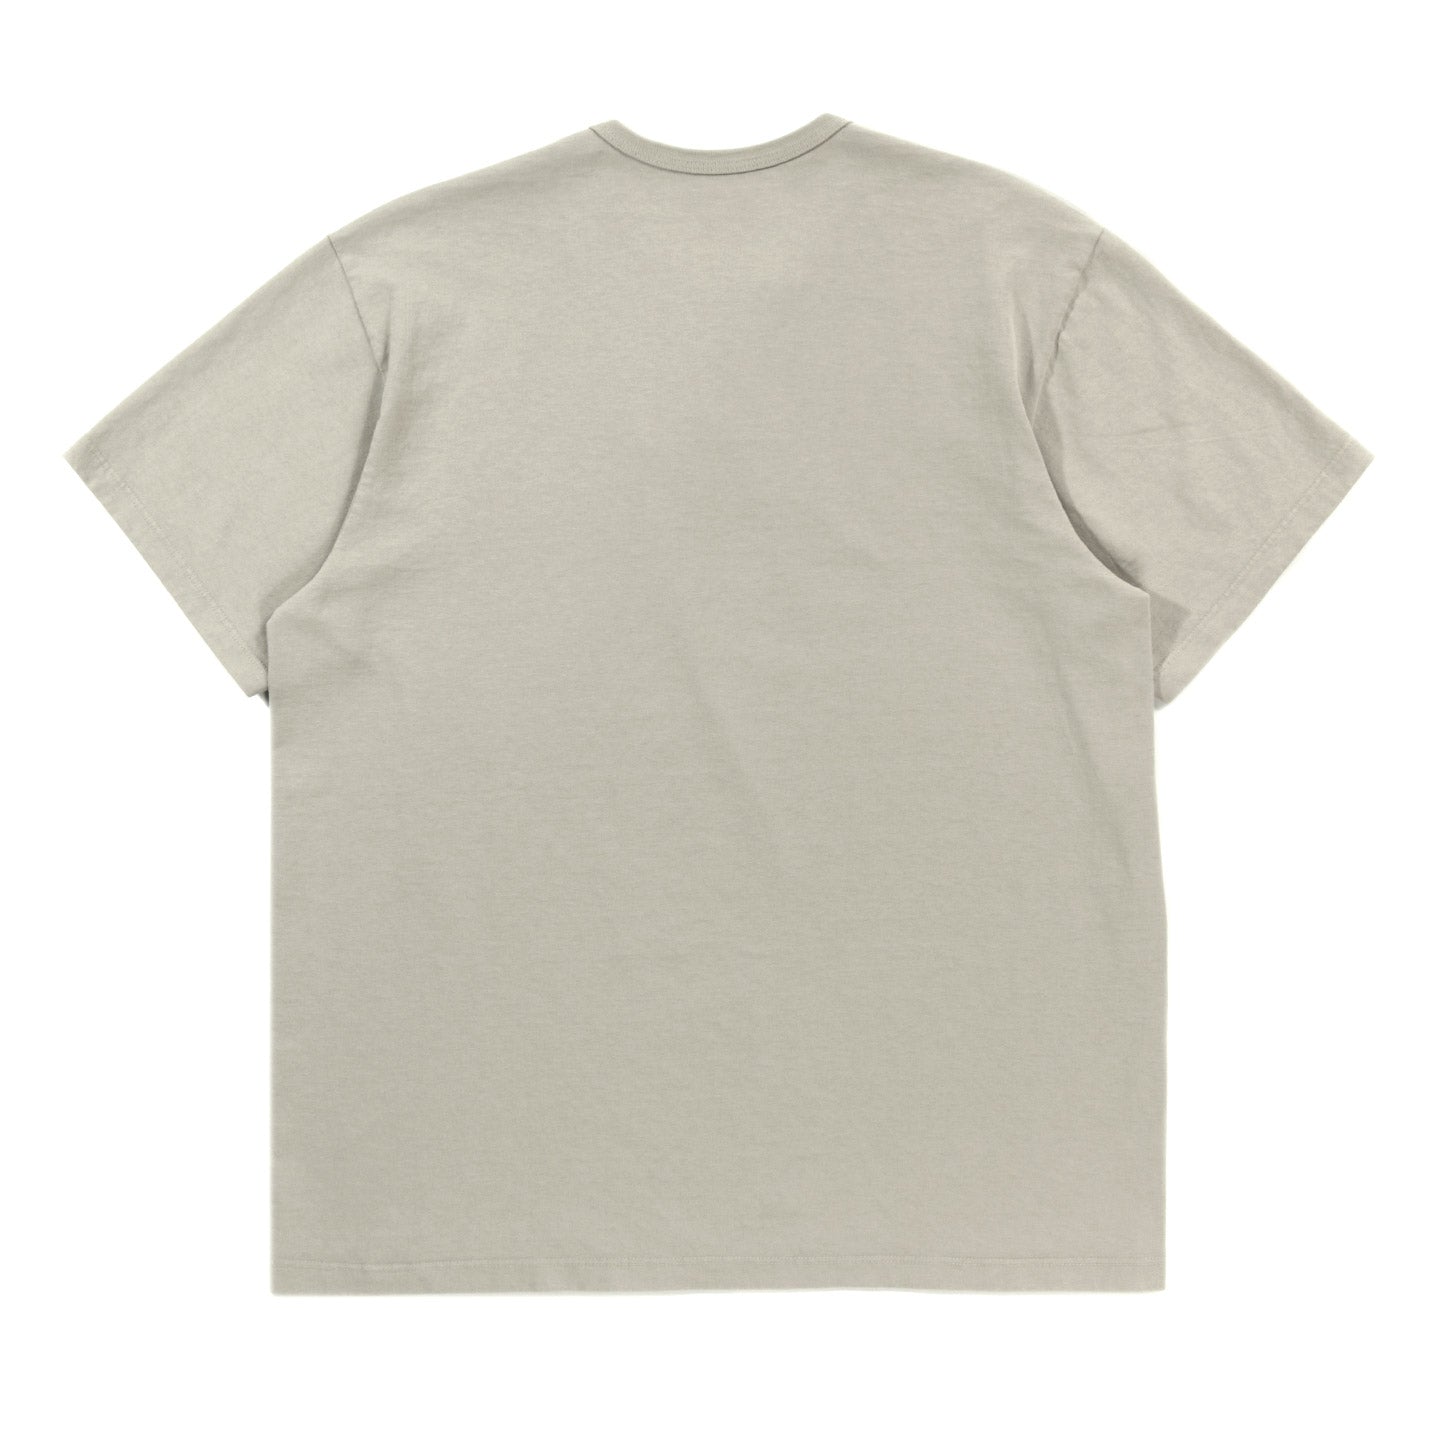 LADY WHITE CO. T-SHIRT 2-PACK PALE CLAY